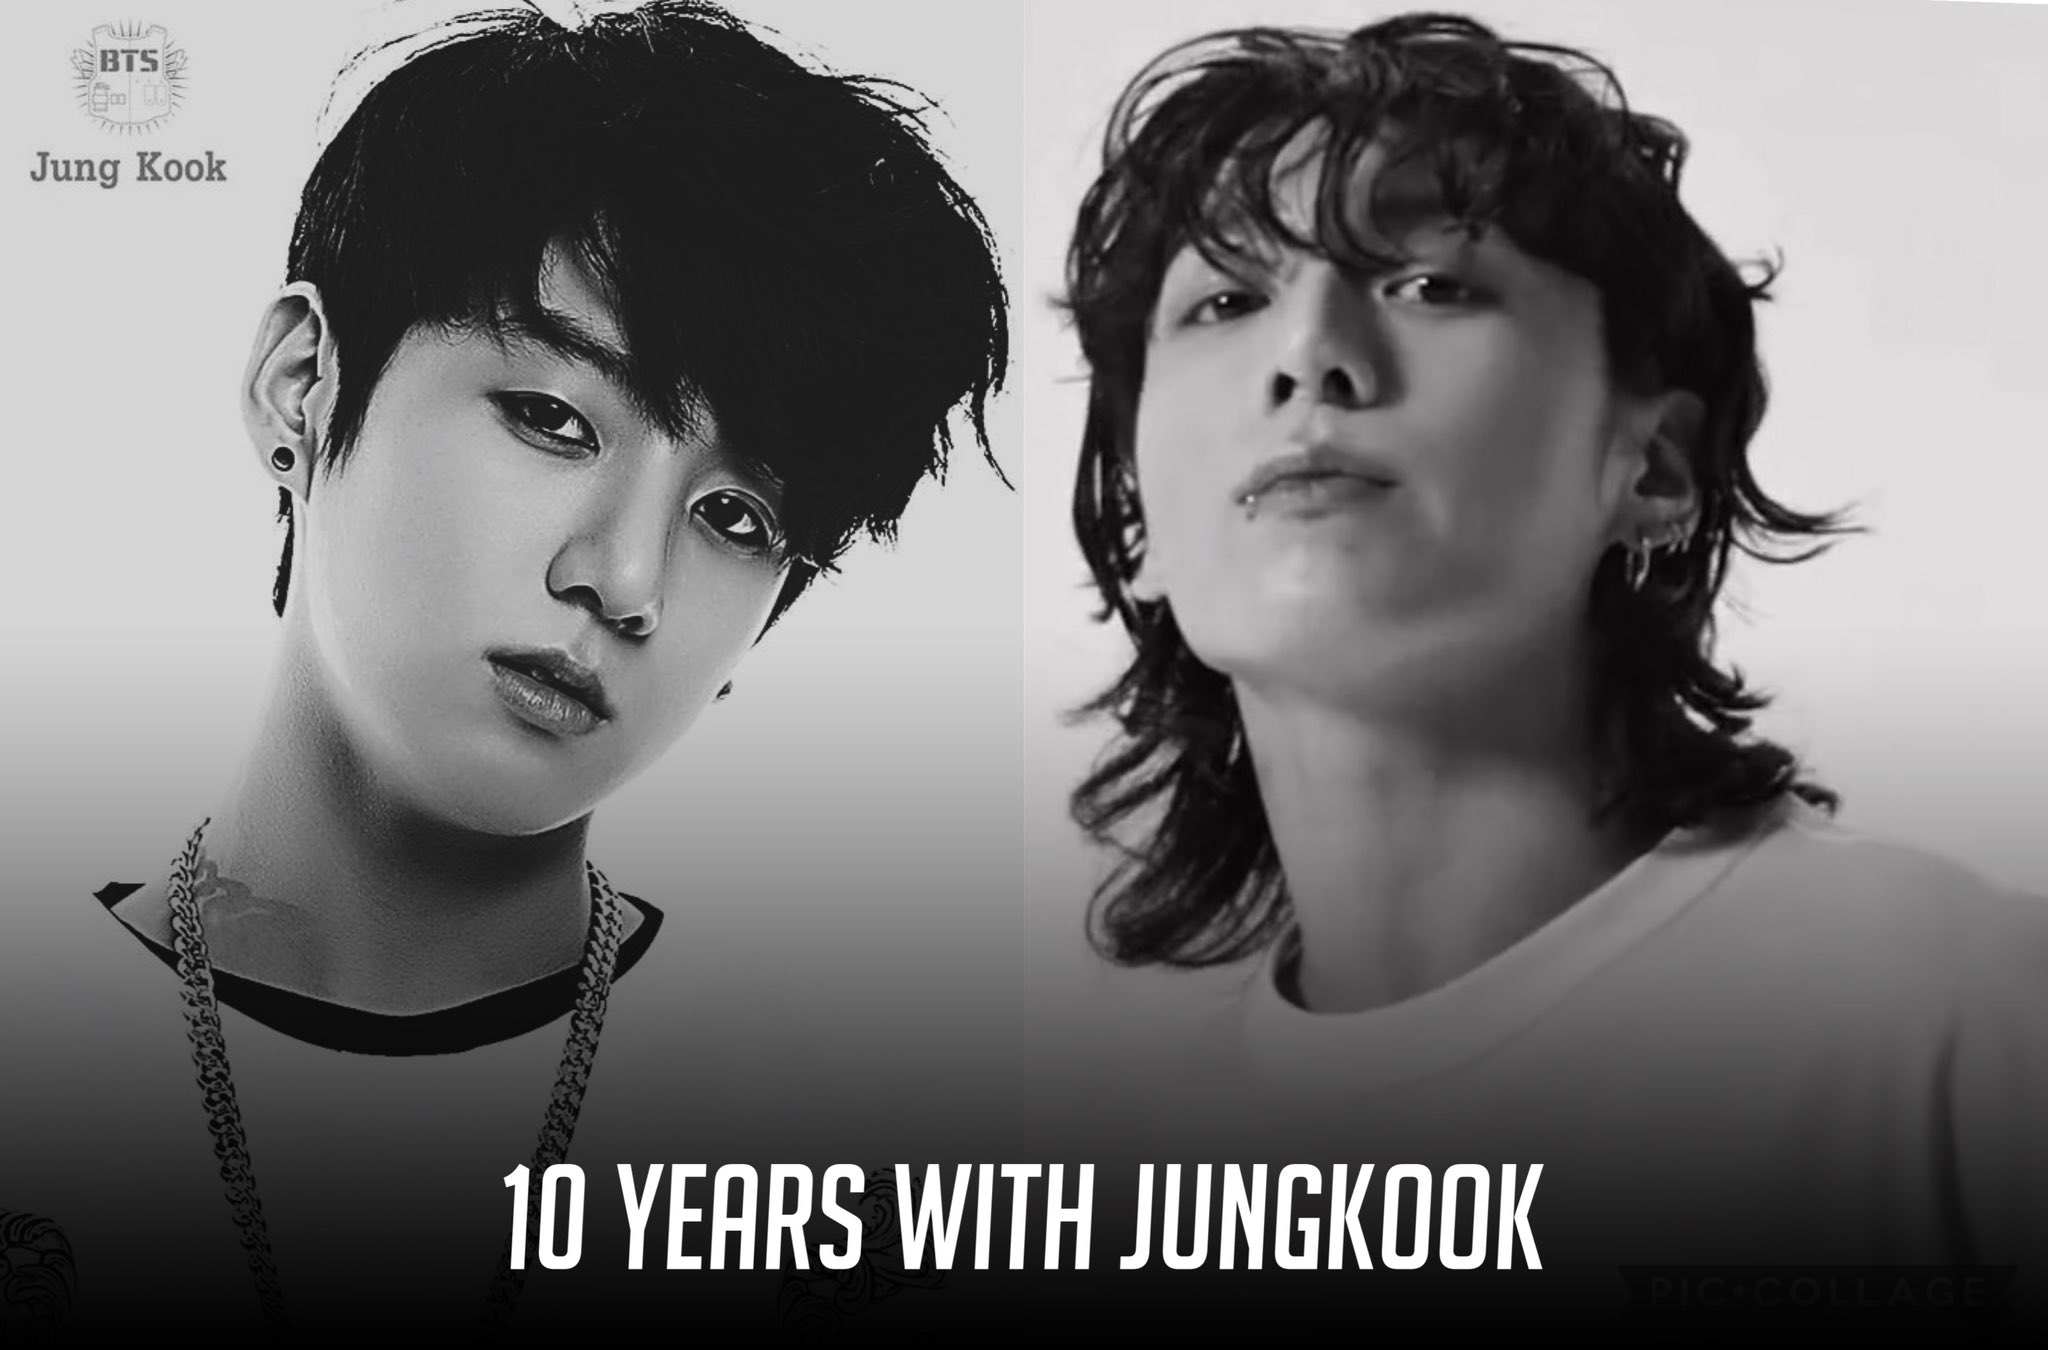 BTSコミュニティ投稿 - 10 years ago, Jungkook was officially 